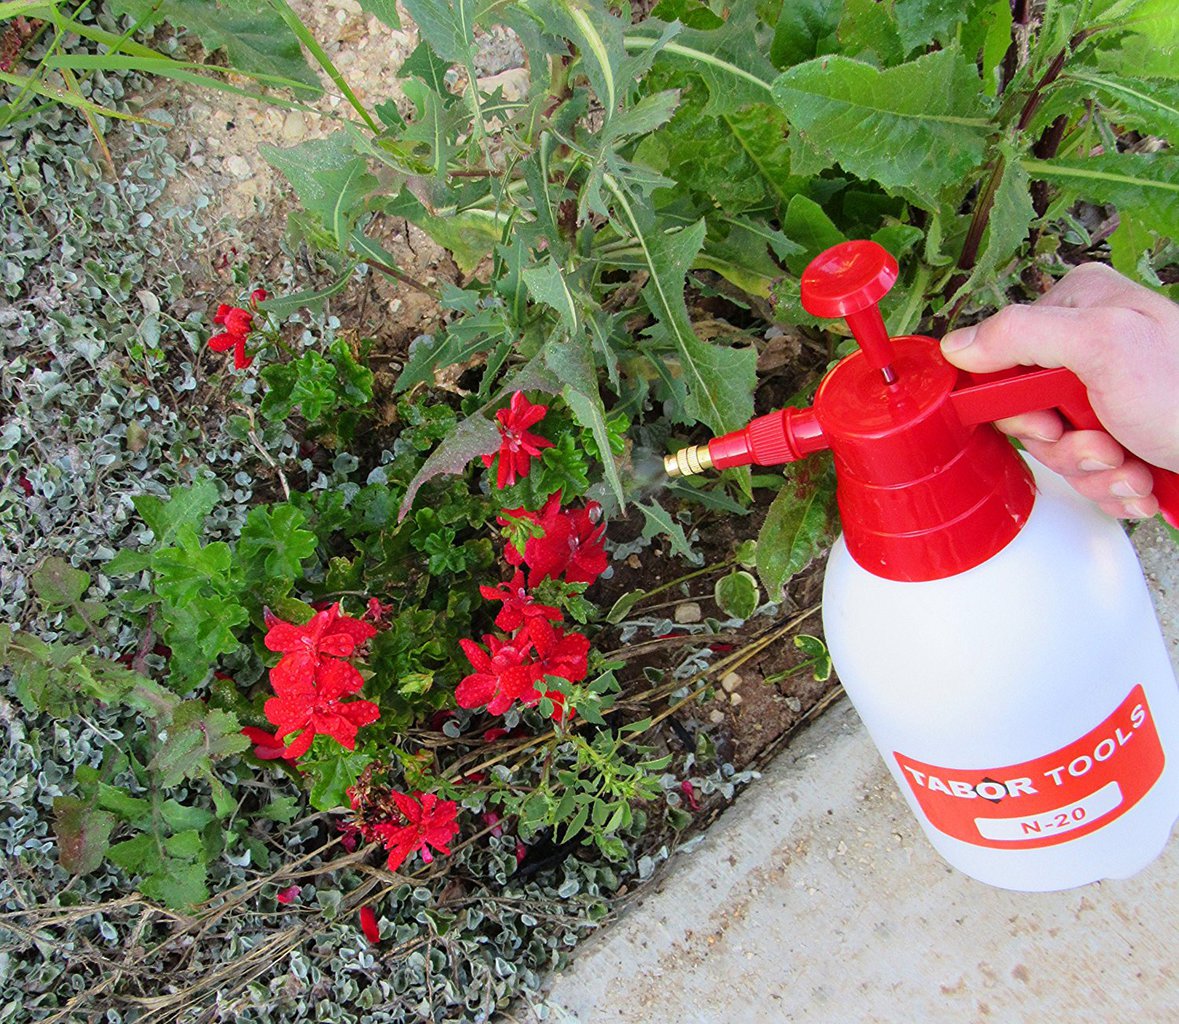 Top 10 Best Weed Killer Sprayer Reviews In 2018 Pros And Cons